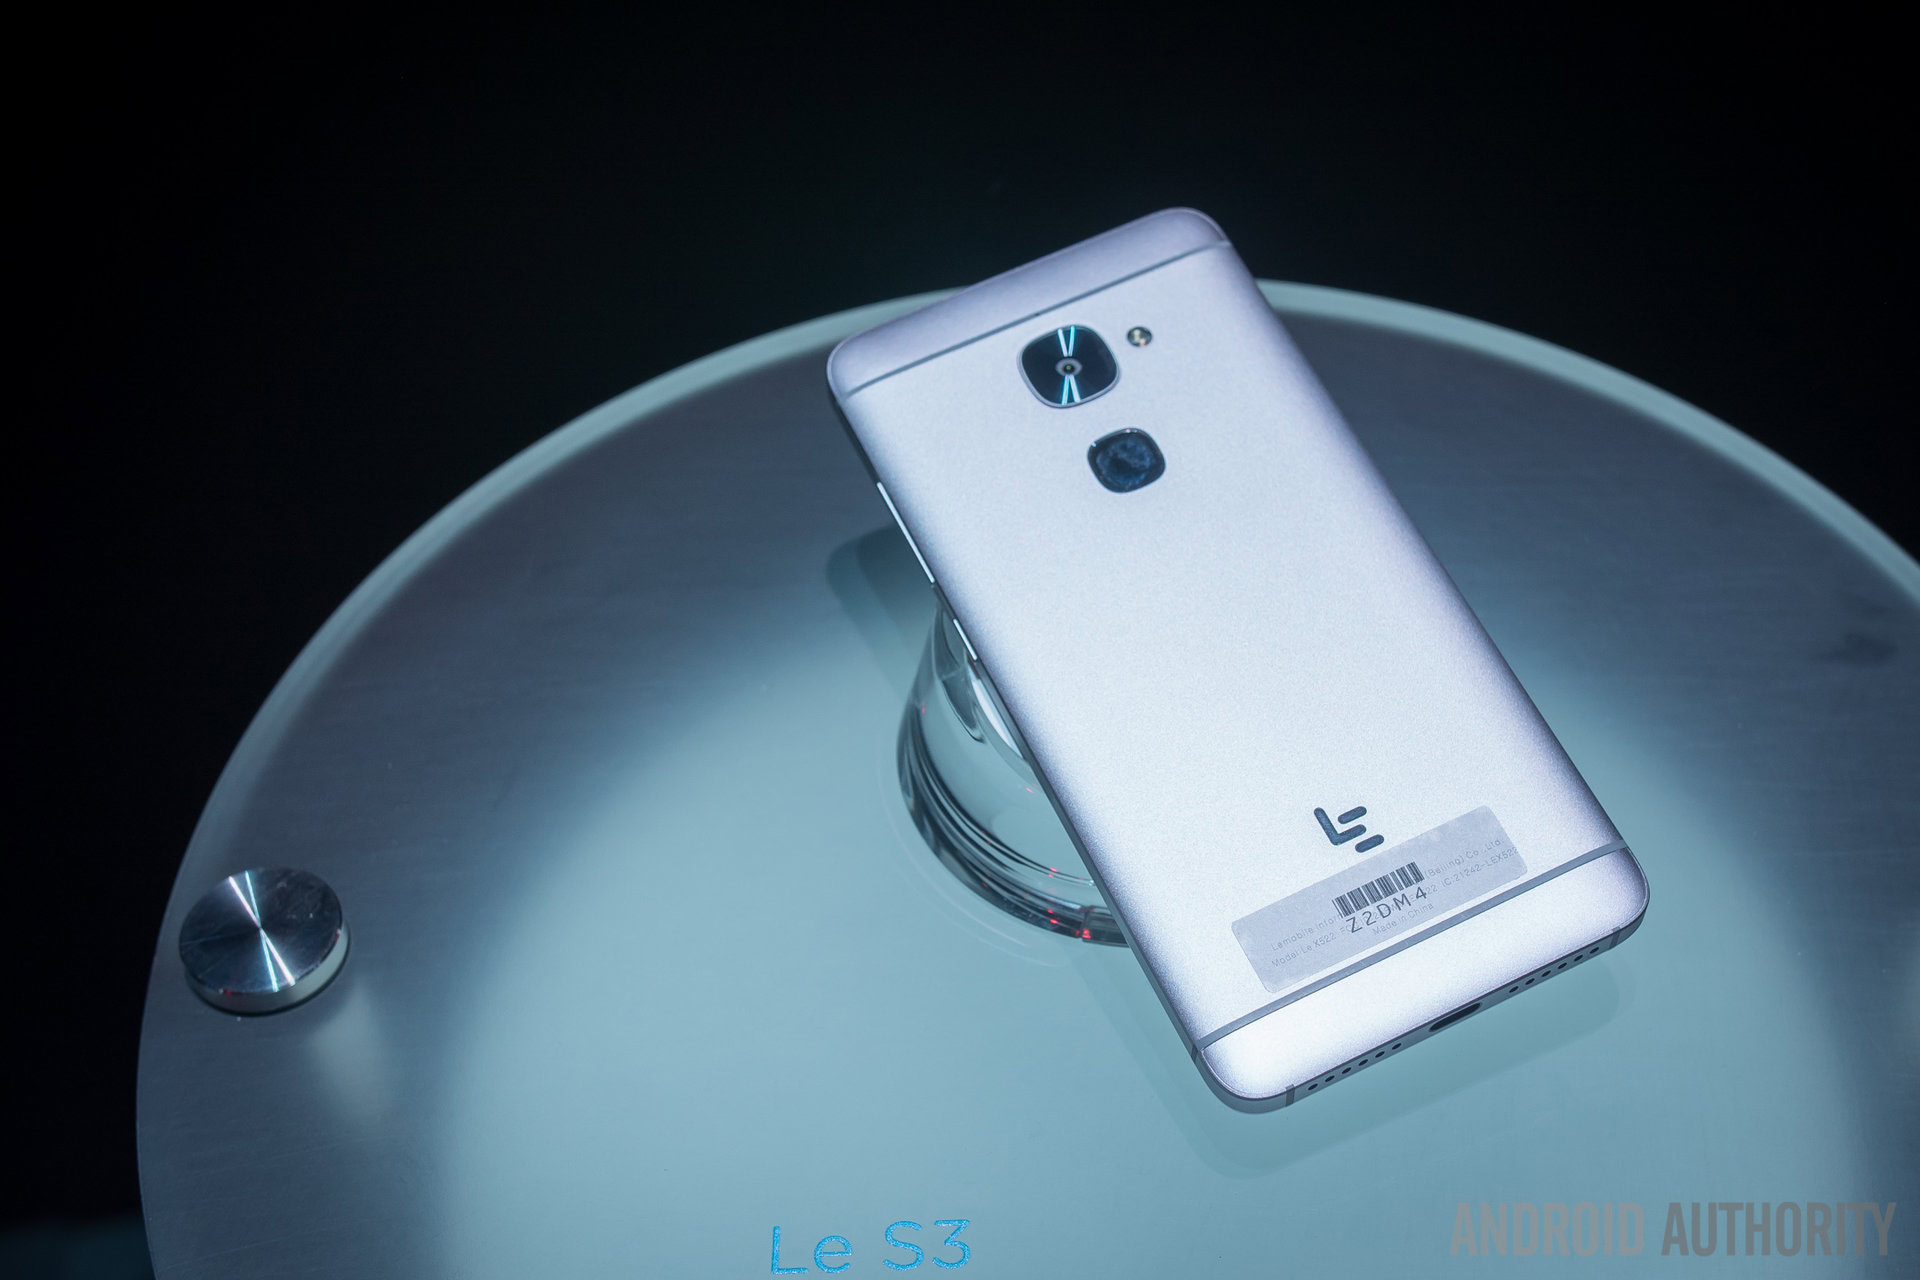 leeco-le-s3-hands-on-10-of-13